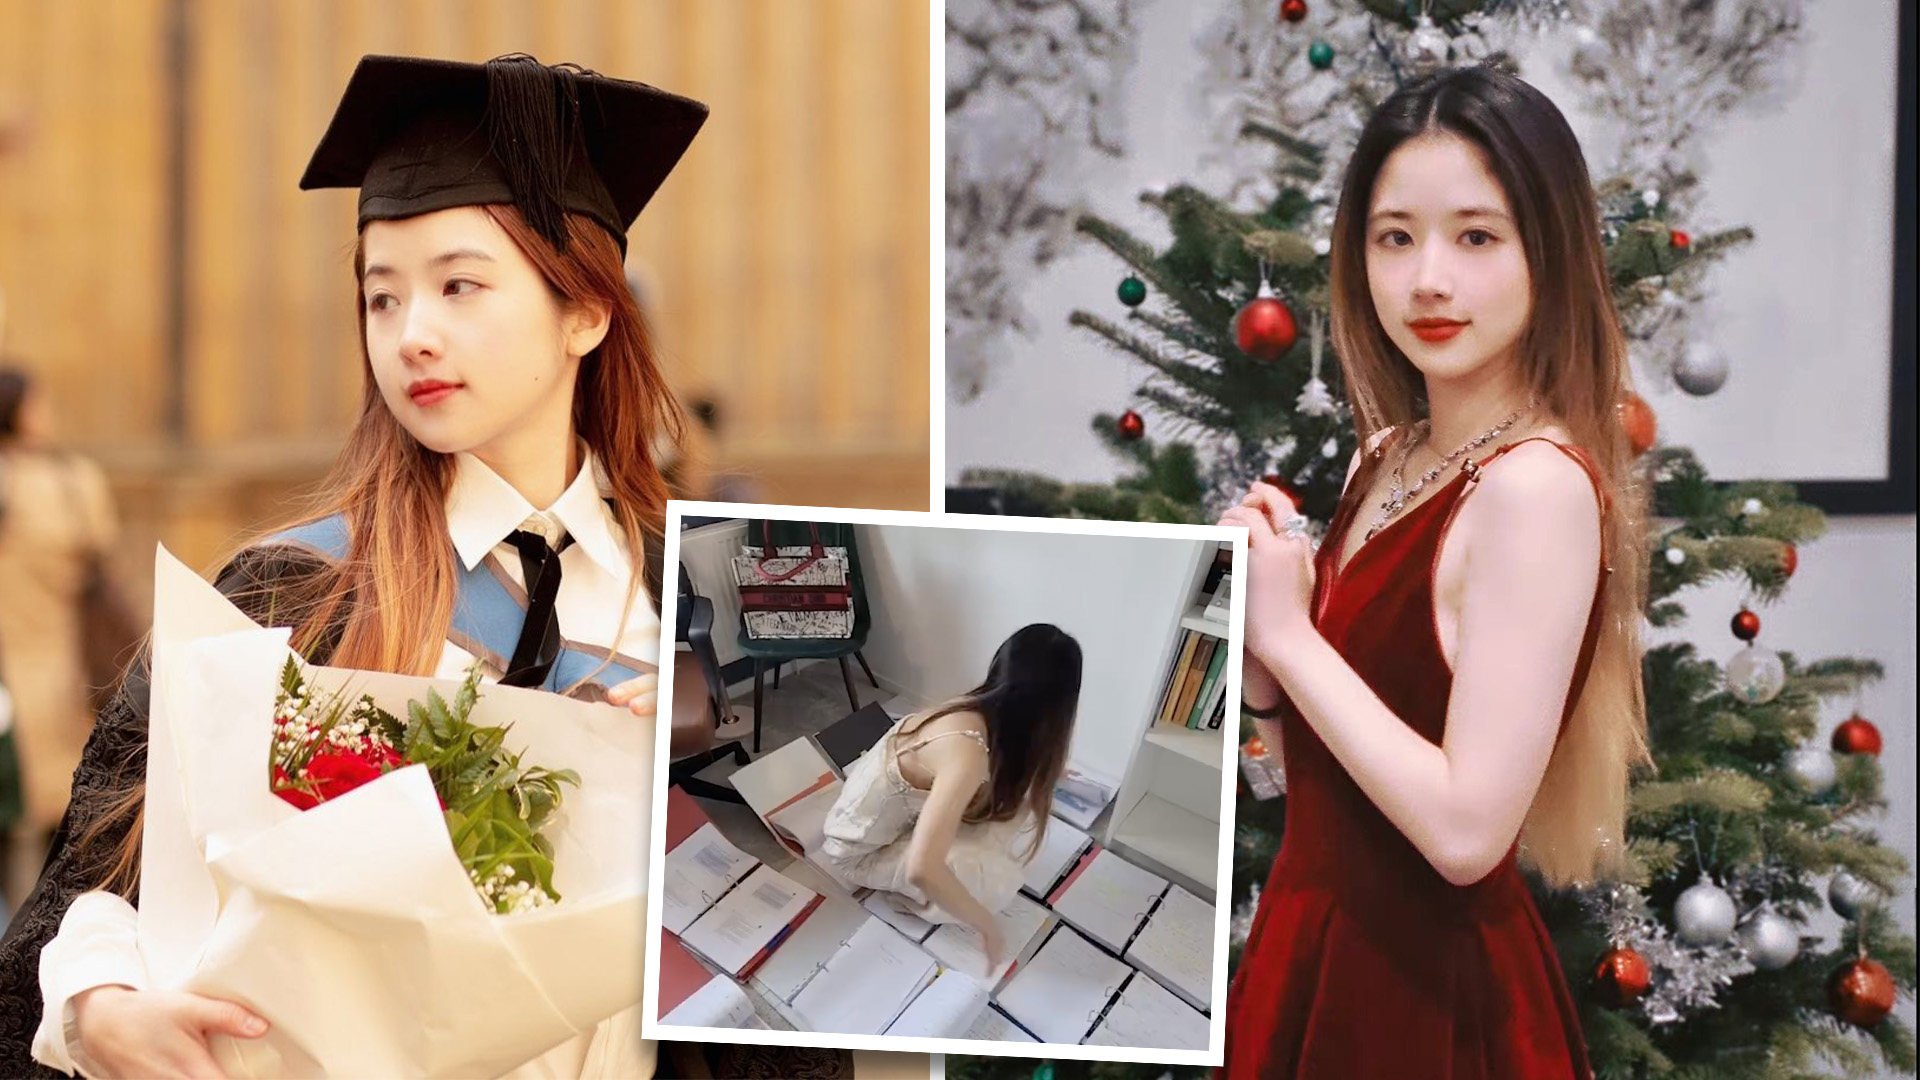 Kate Zhu Wenqi came under intense criticism for posting a video of her graduating with a master’s degree in mathematics from a top UK university. Photo: SCMP composite/handout